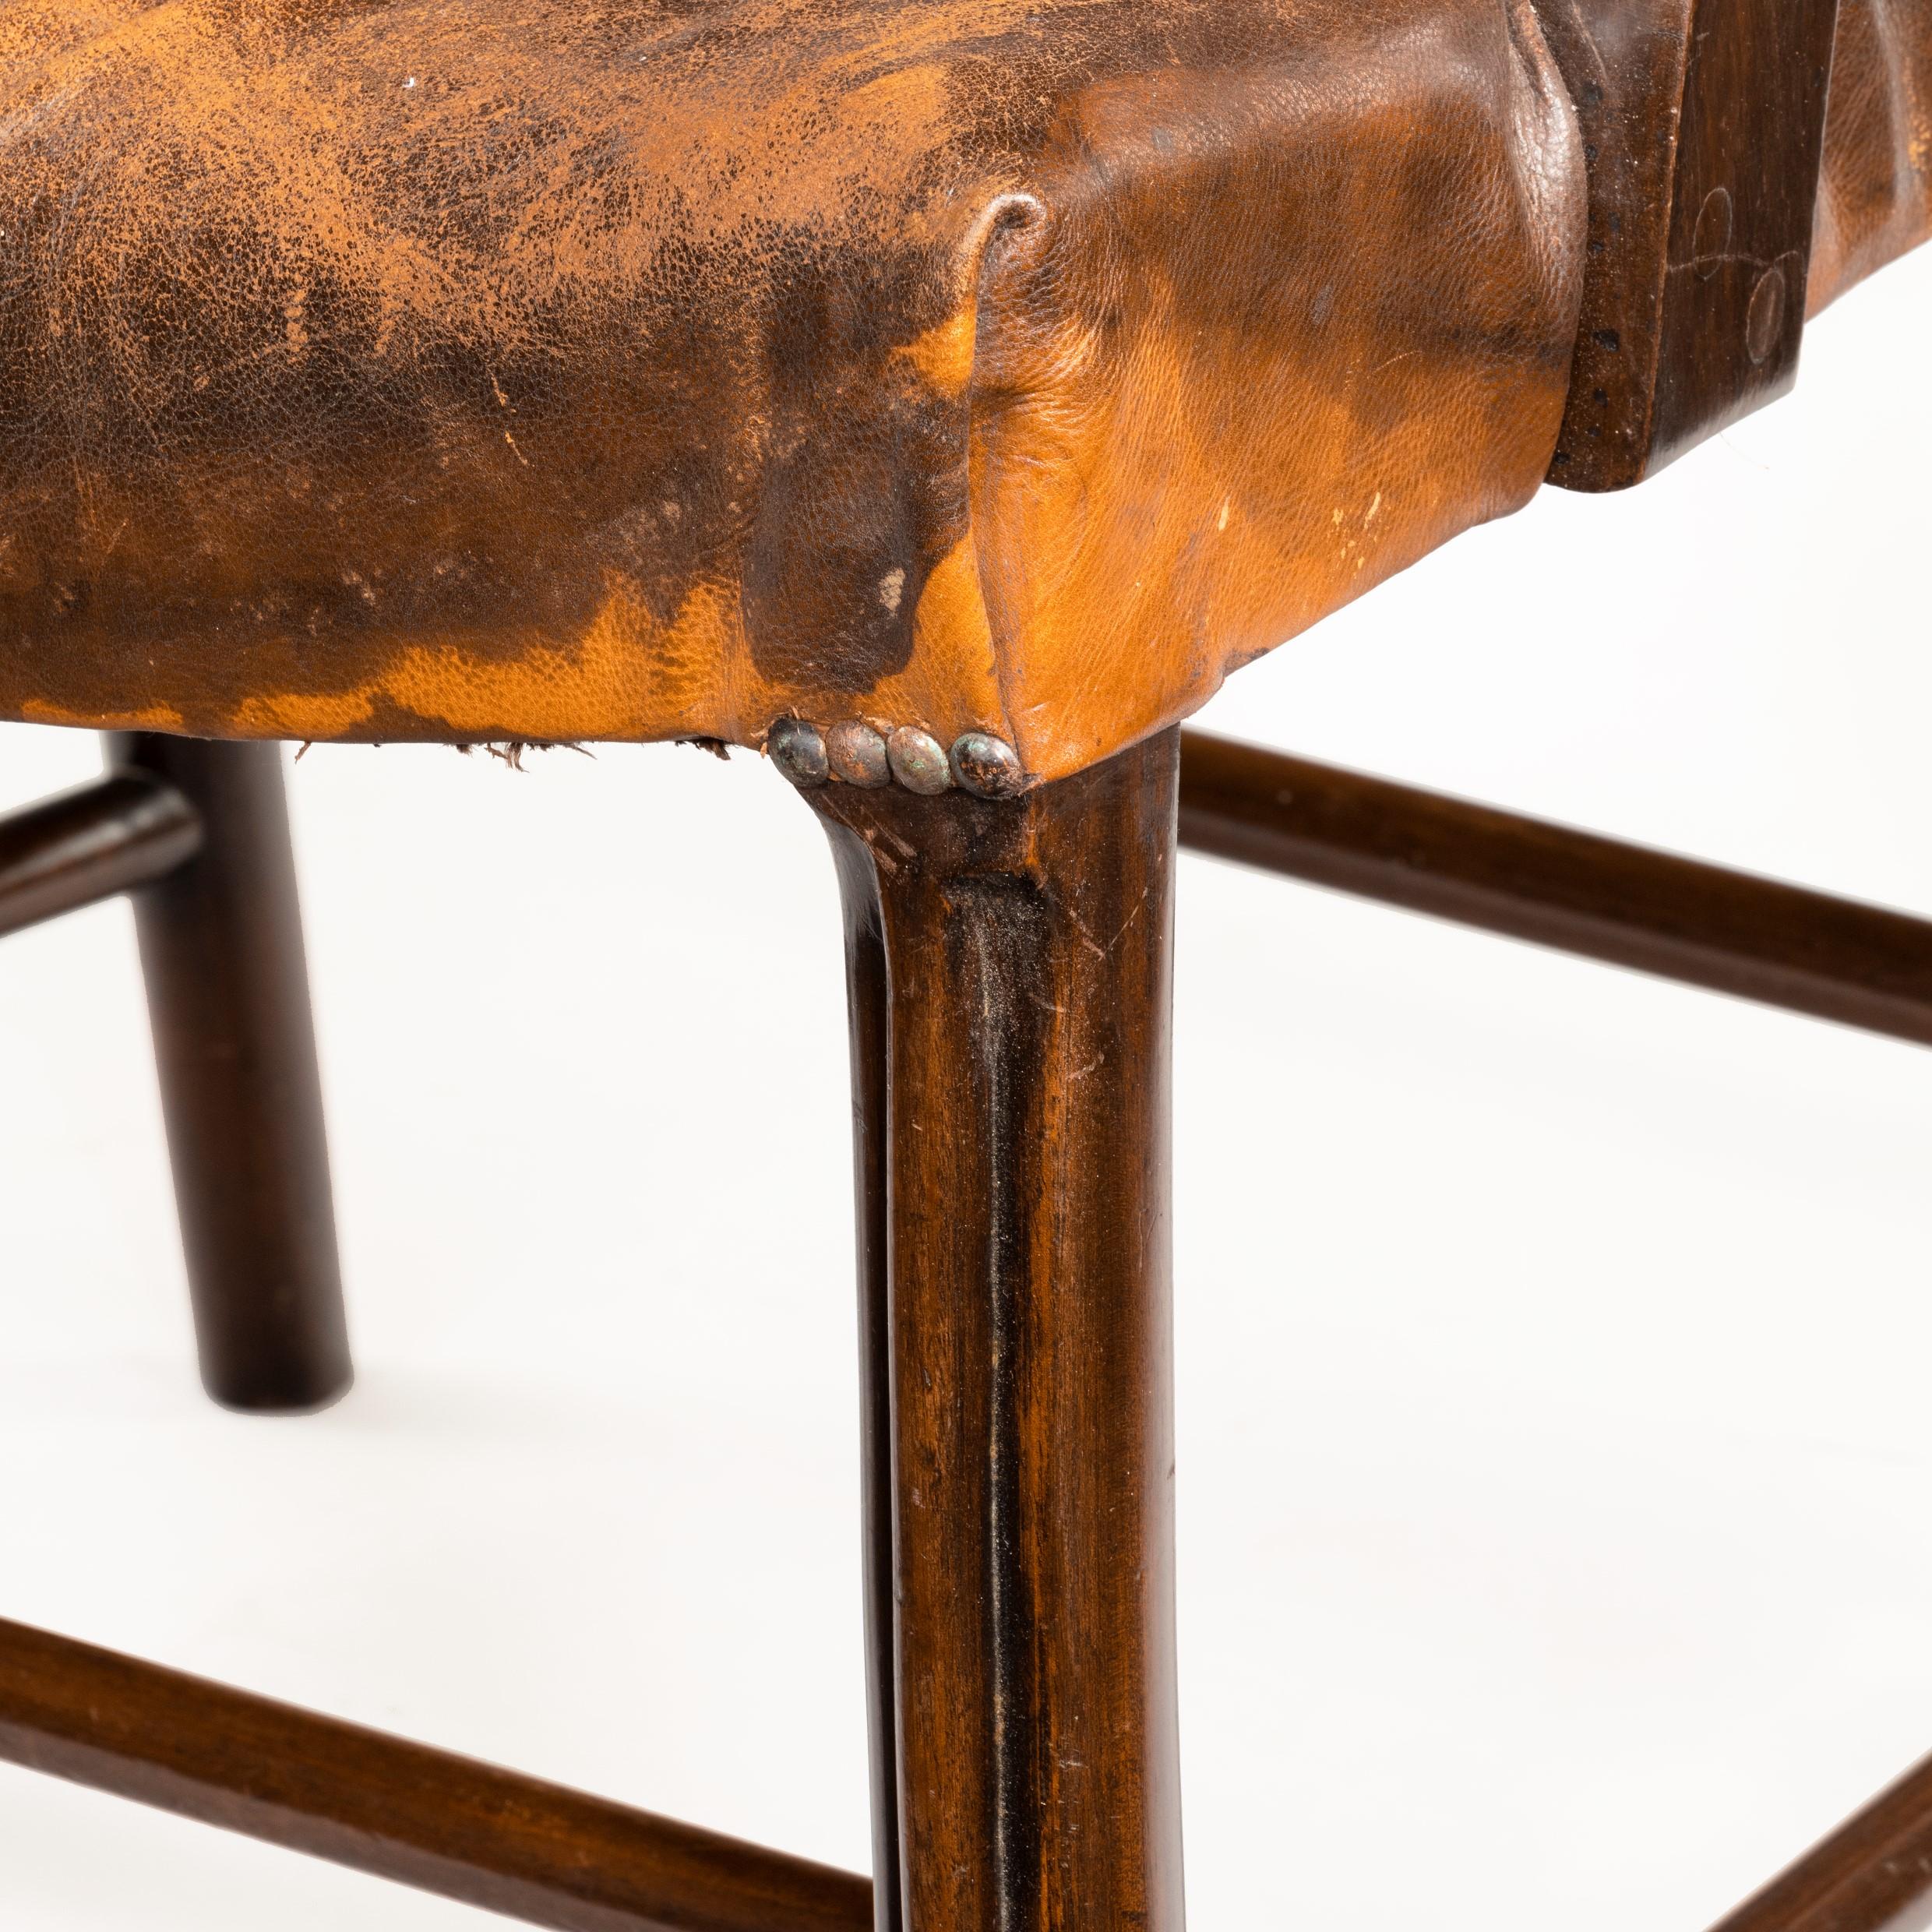 The old leathered seat raised upon slightly out swept legs.
English, circa 1890.